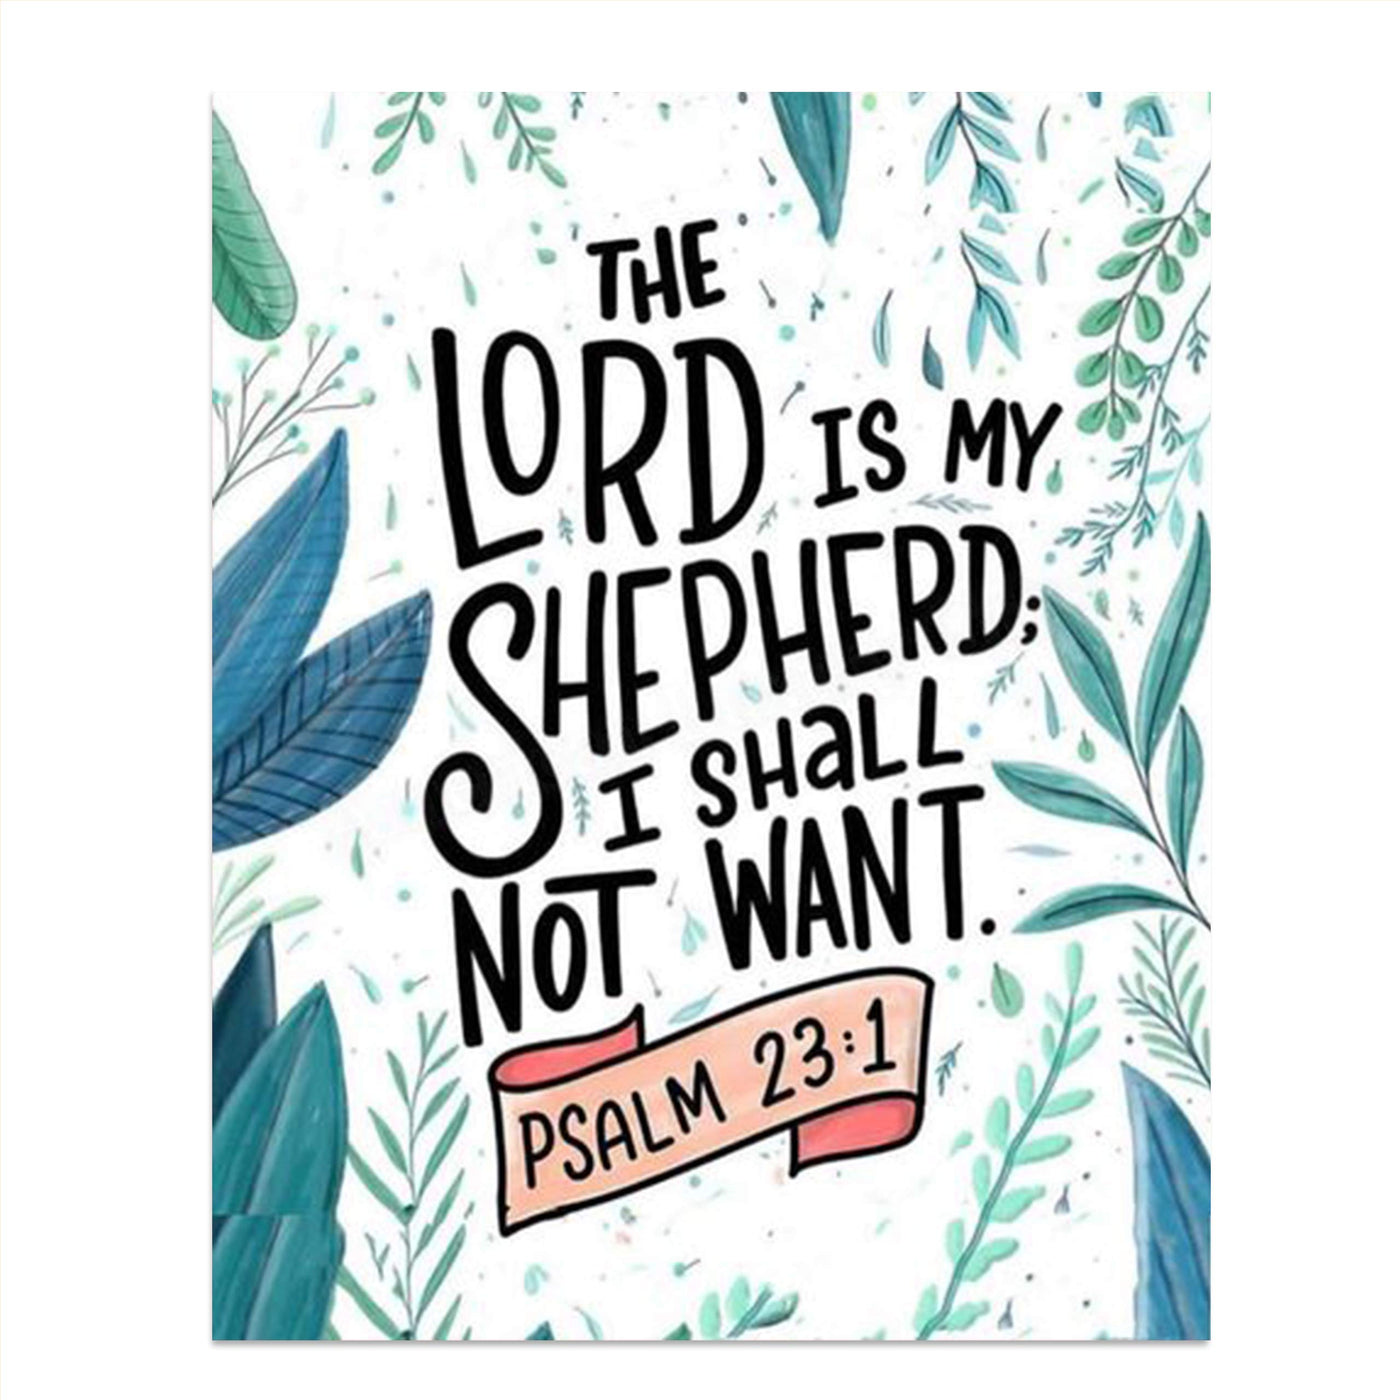 The Lord Is My Shepard, I Shall Not Want-Psalms 23:1- Bible Verse Wall Print-8x10- Watercolor Scripture Wall Art Replica- Ready to Frame. Home D?cor- Office D?cor- Christian Gifts. Favorite Verse.